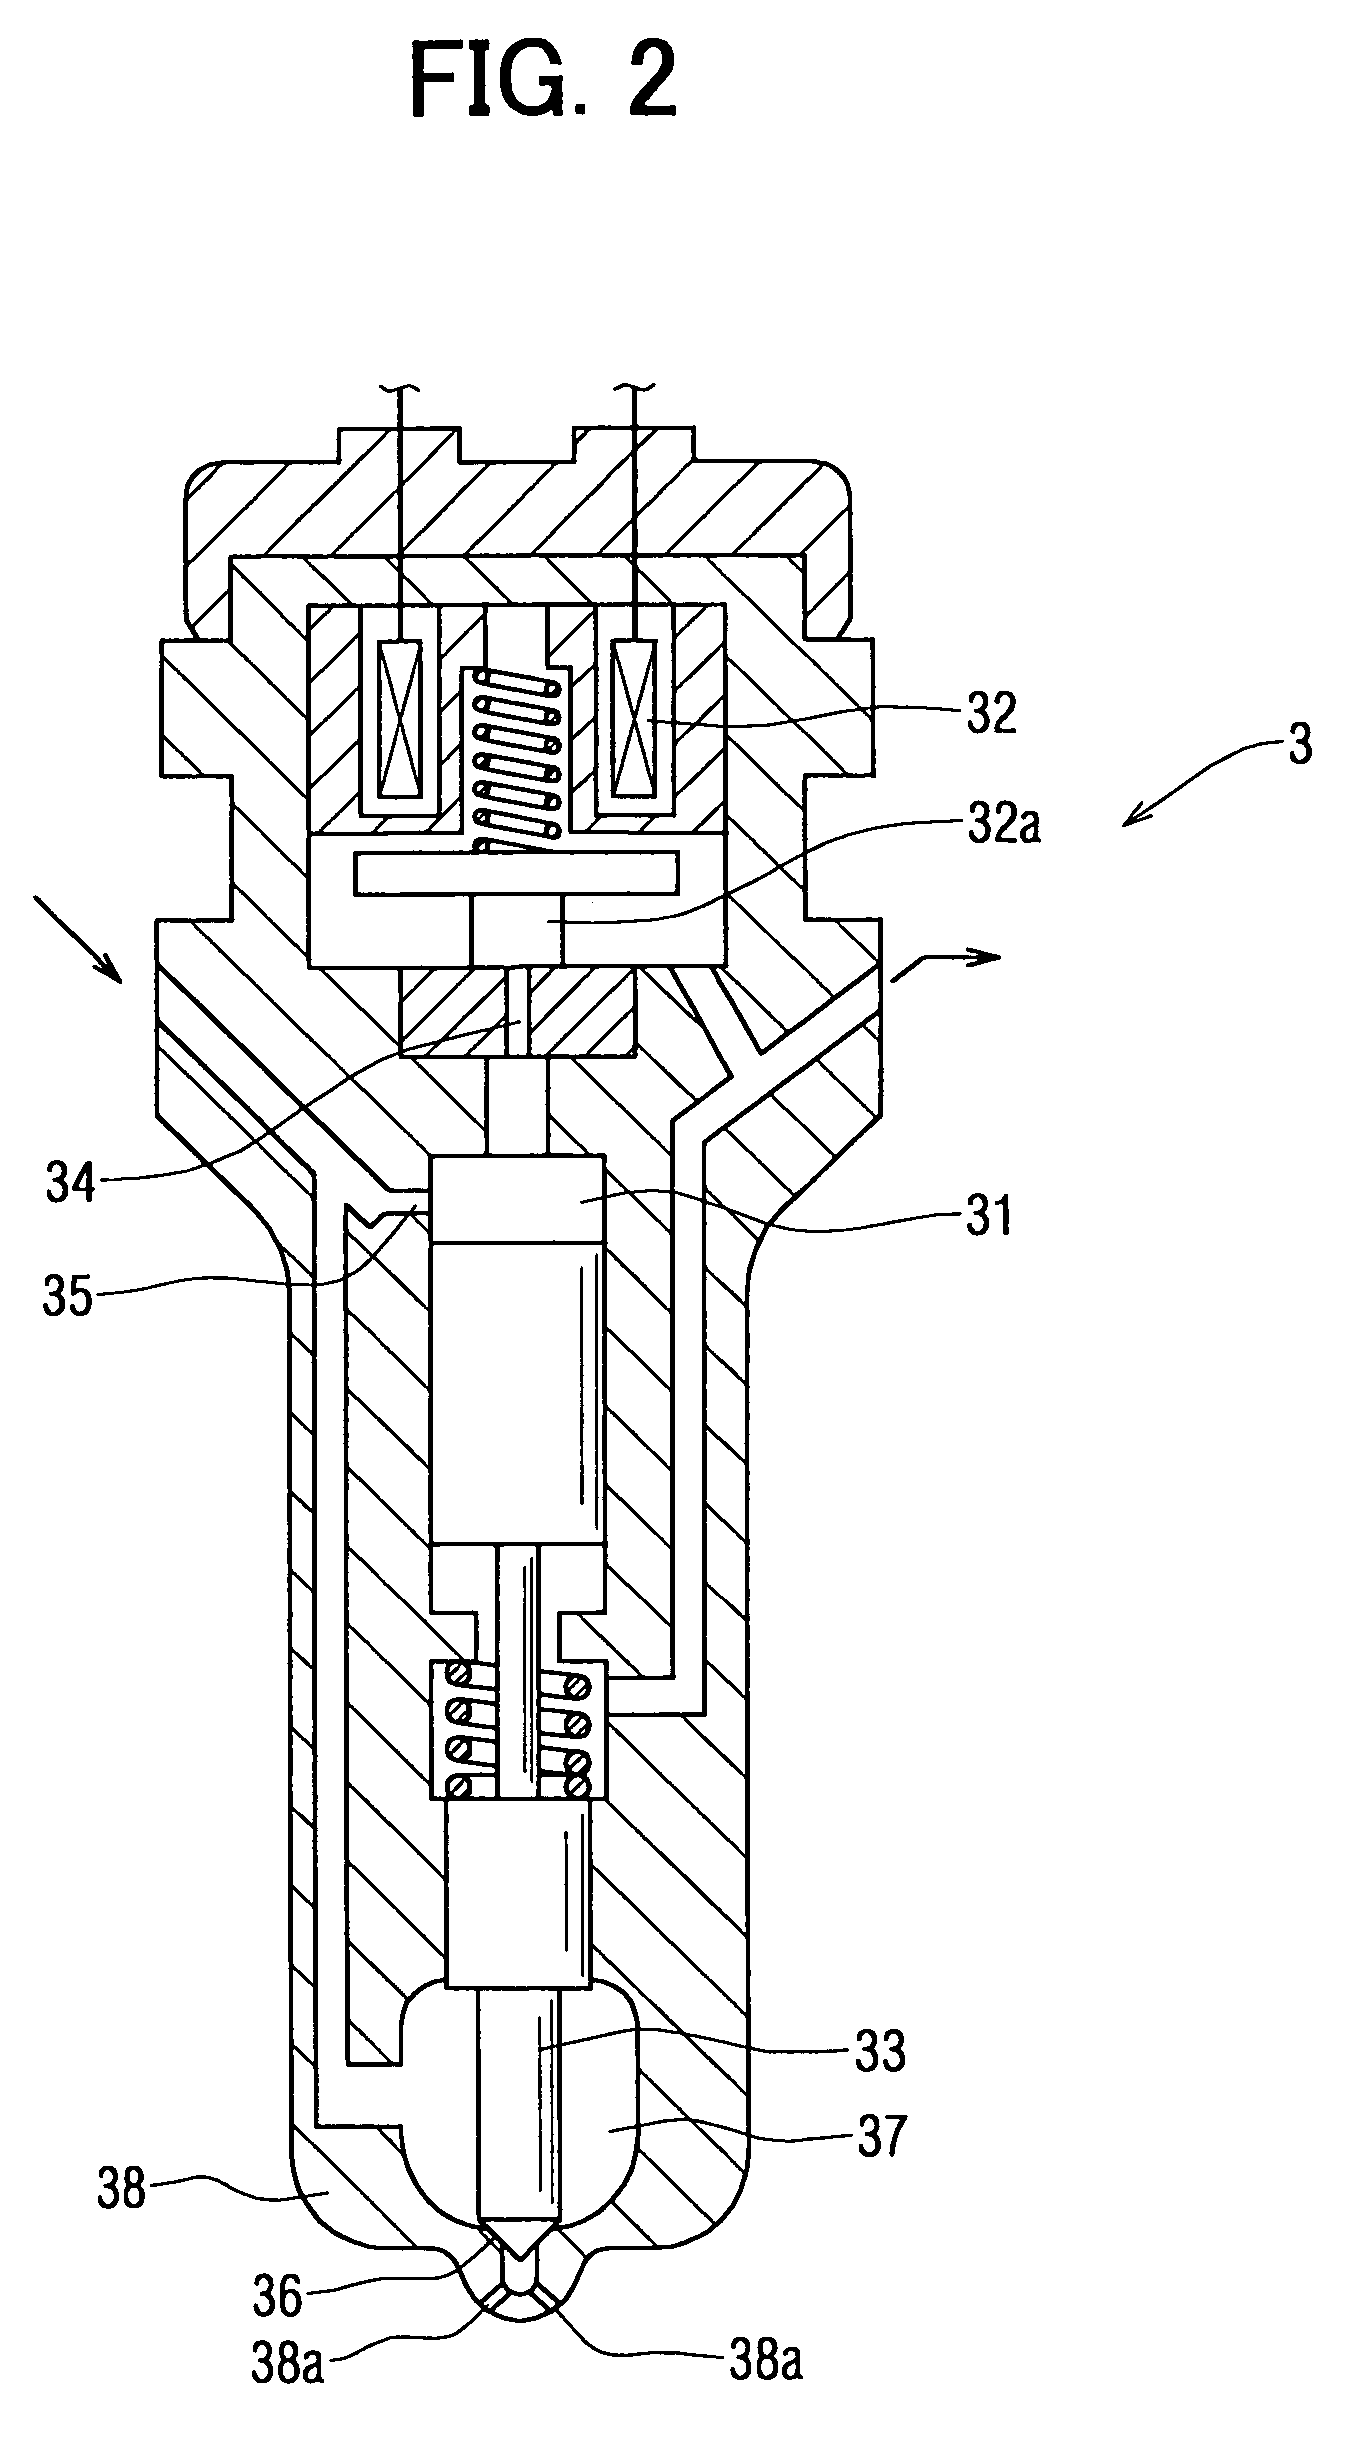 Common rail fuel injection system